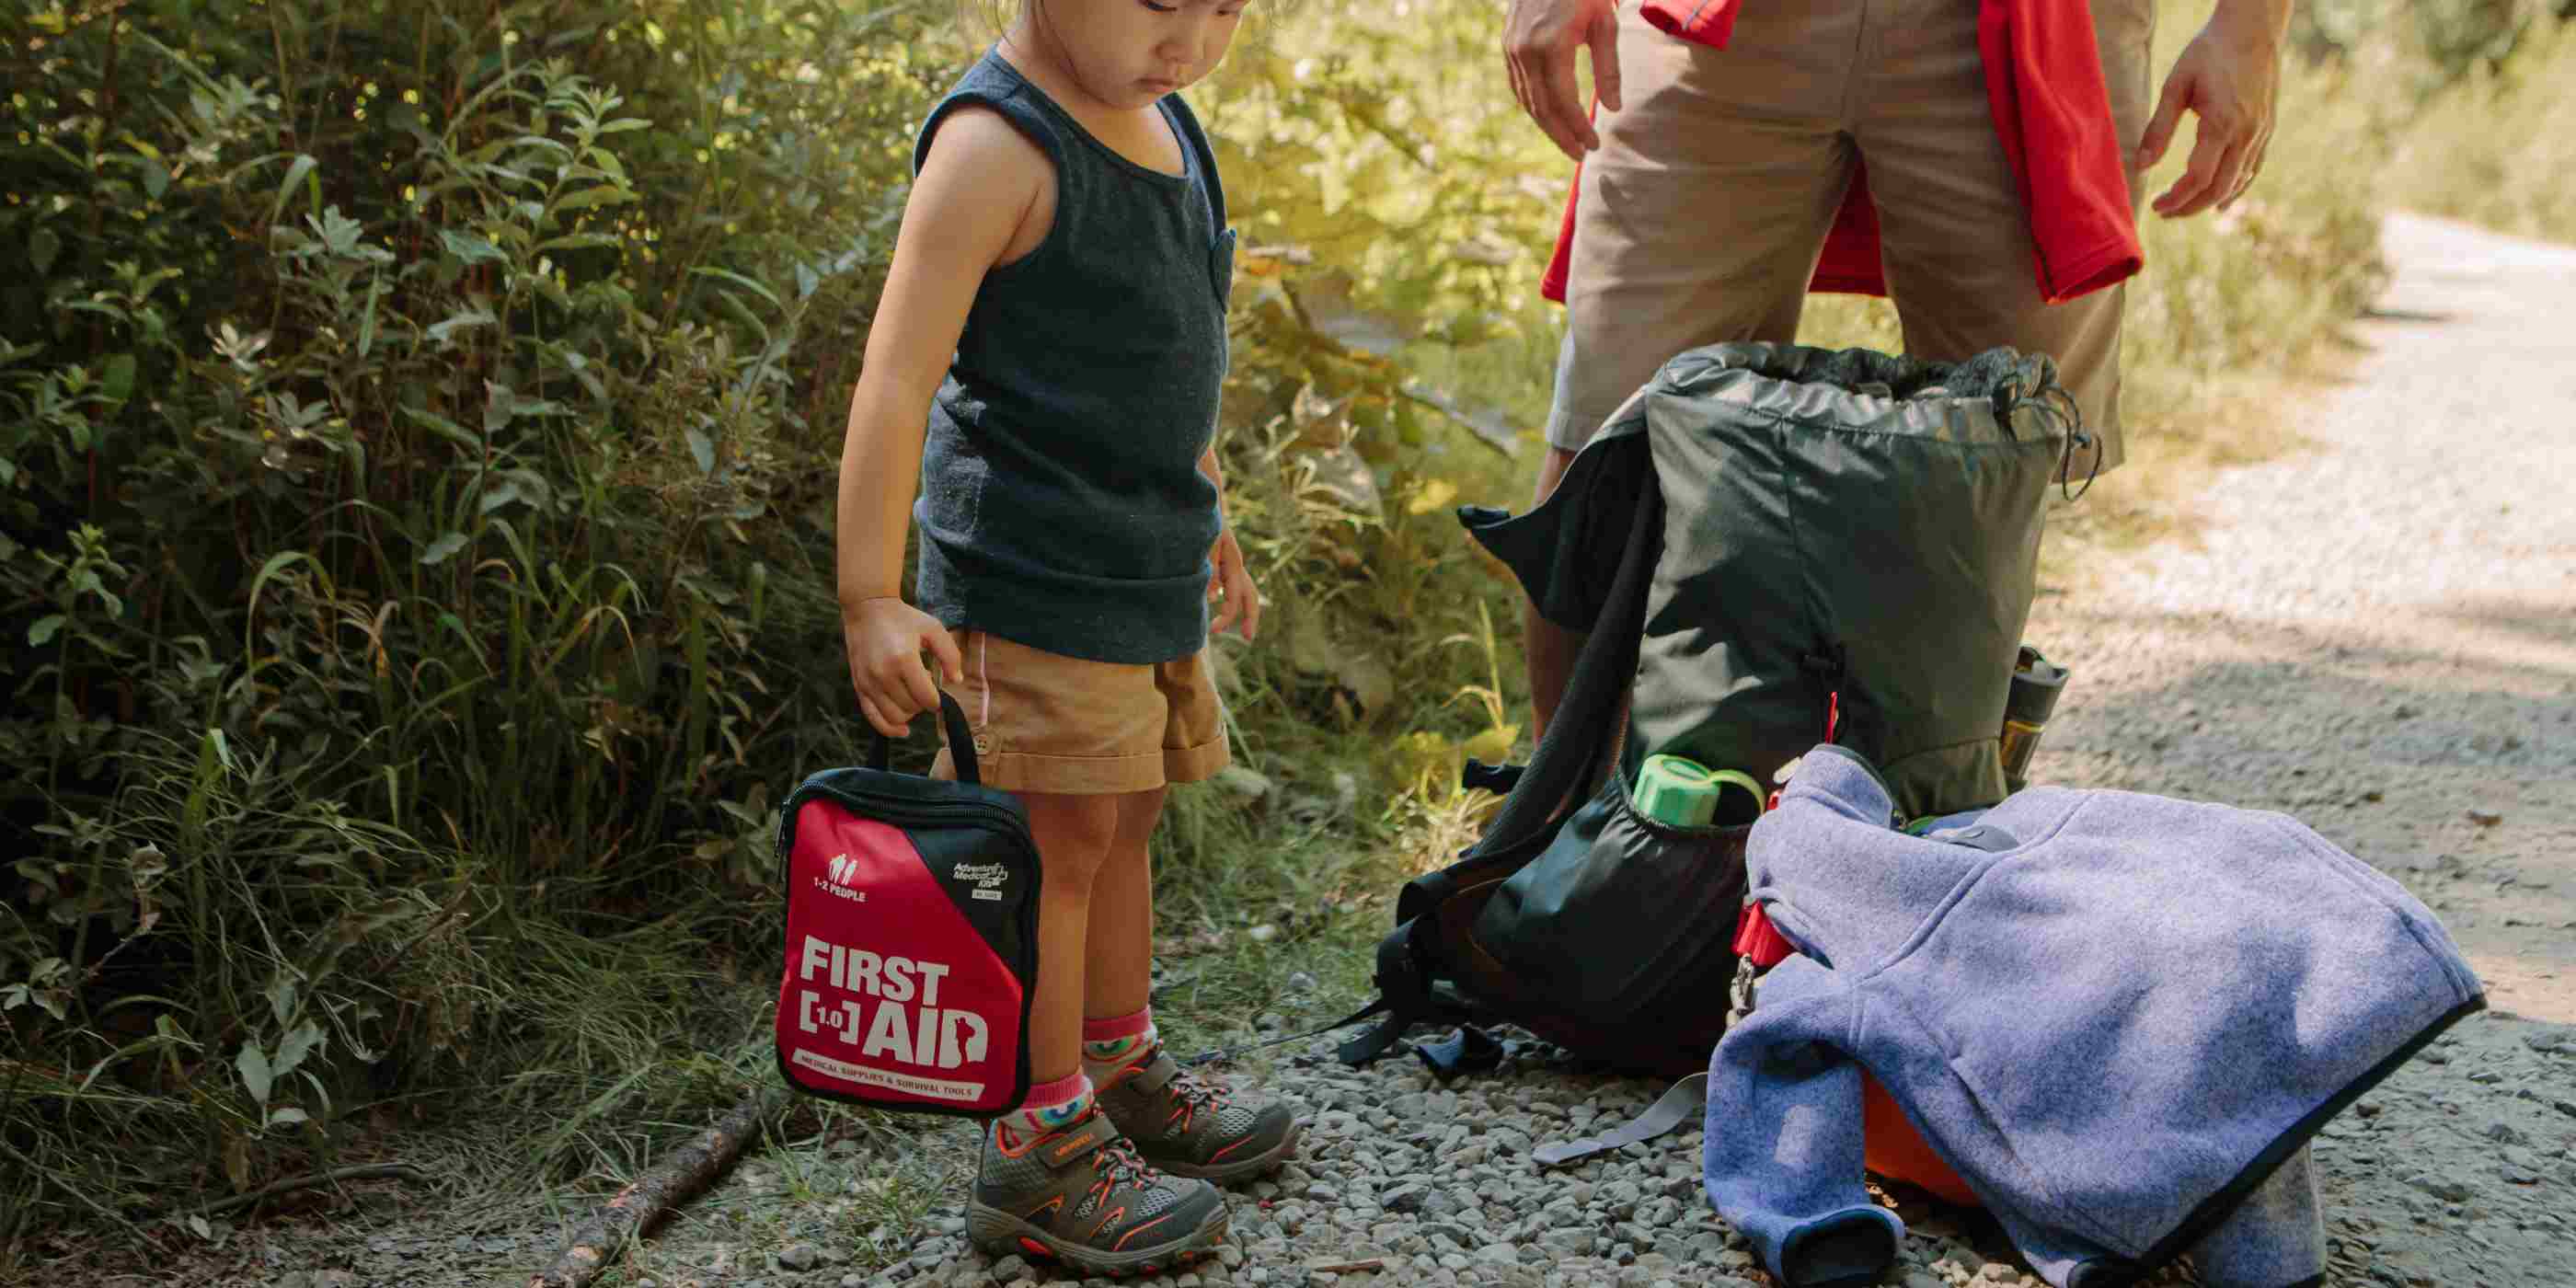 Adventure First Aid, 1.0 child holding kit while on hike